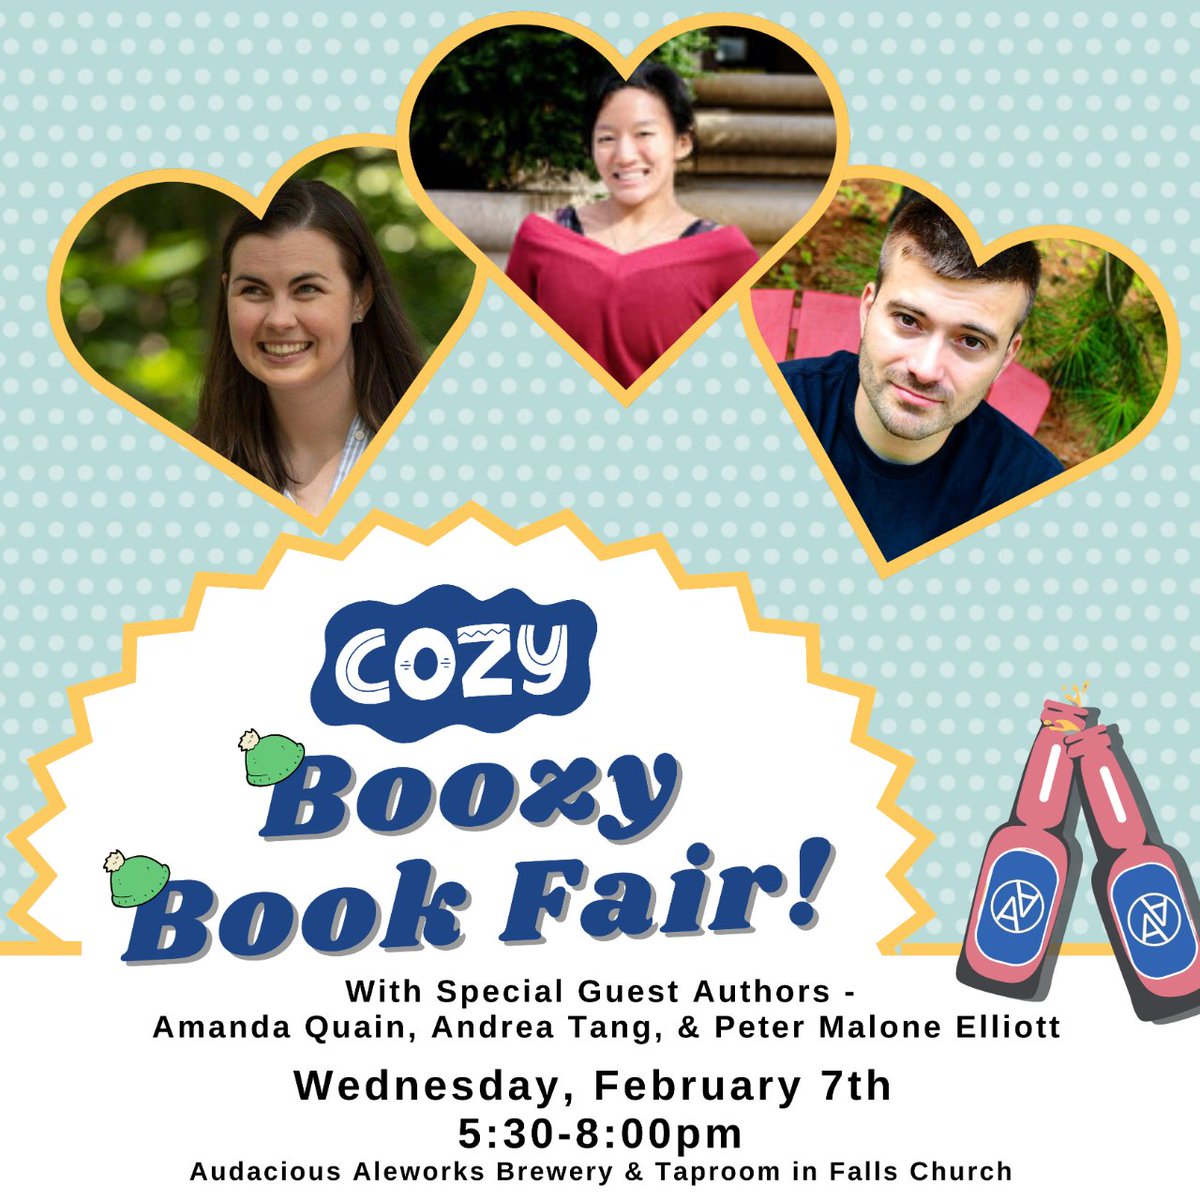 Only a few more days until our next Boozy Bookfair at @AudaciousAle! This time, we have not 1- not 2- but 3 amazing authors who will be there to chat, give their own recommendations, & sign books: @quainiac , @atangwrites , and Peter Malone Elliott! Will we see you on Wednesday?